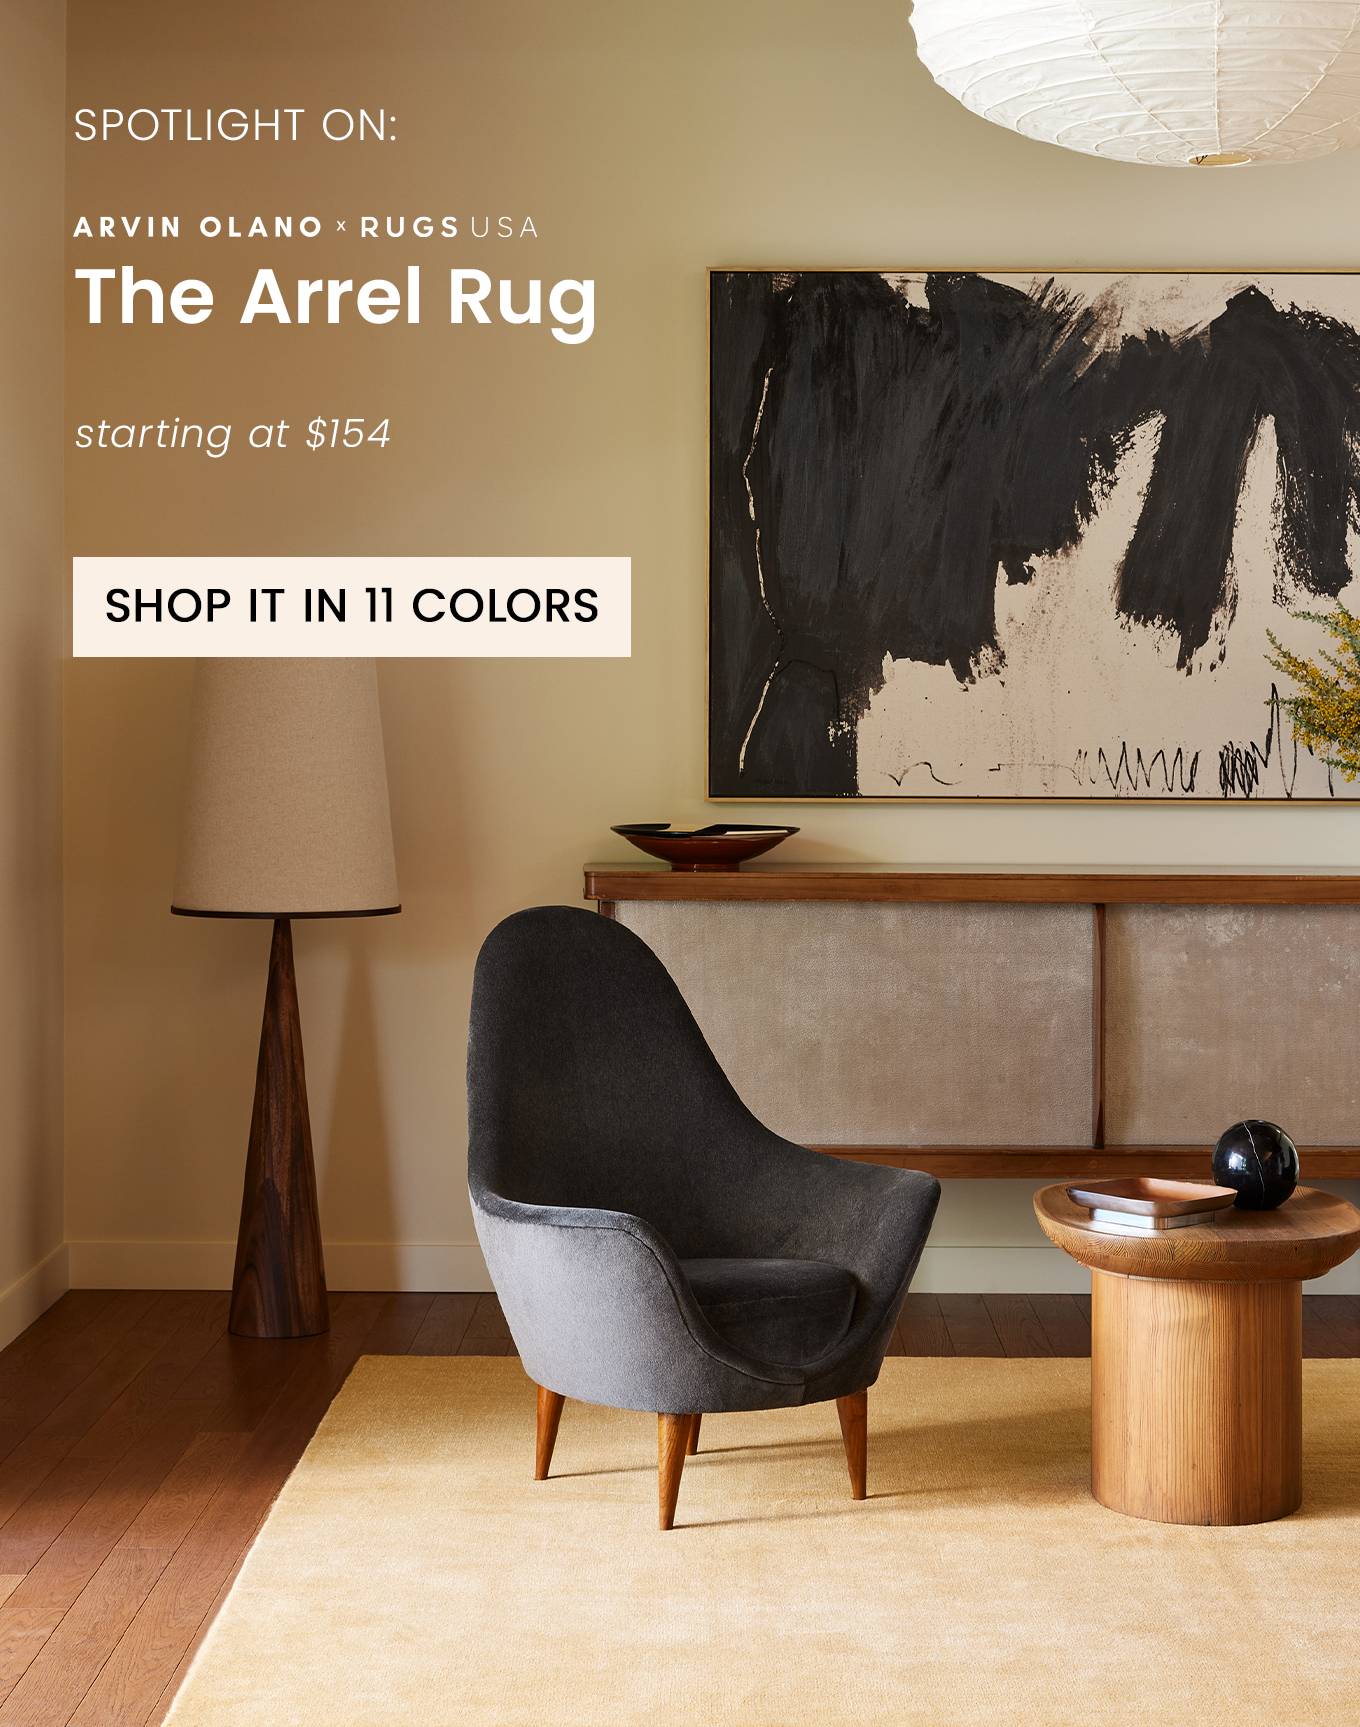 Spotlight On: Arvin Olano x Rugs USA | The Arrel Rug | starting at $154 | Shop It In 11 Colors